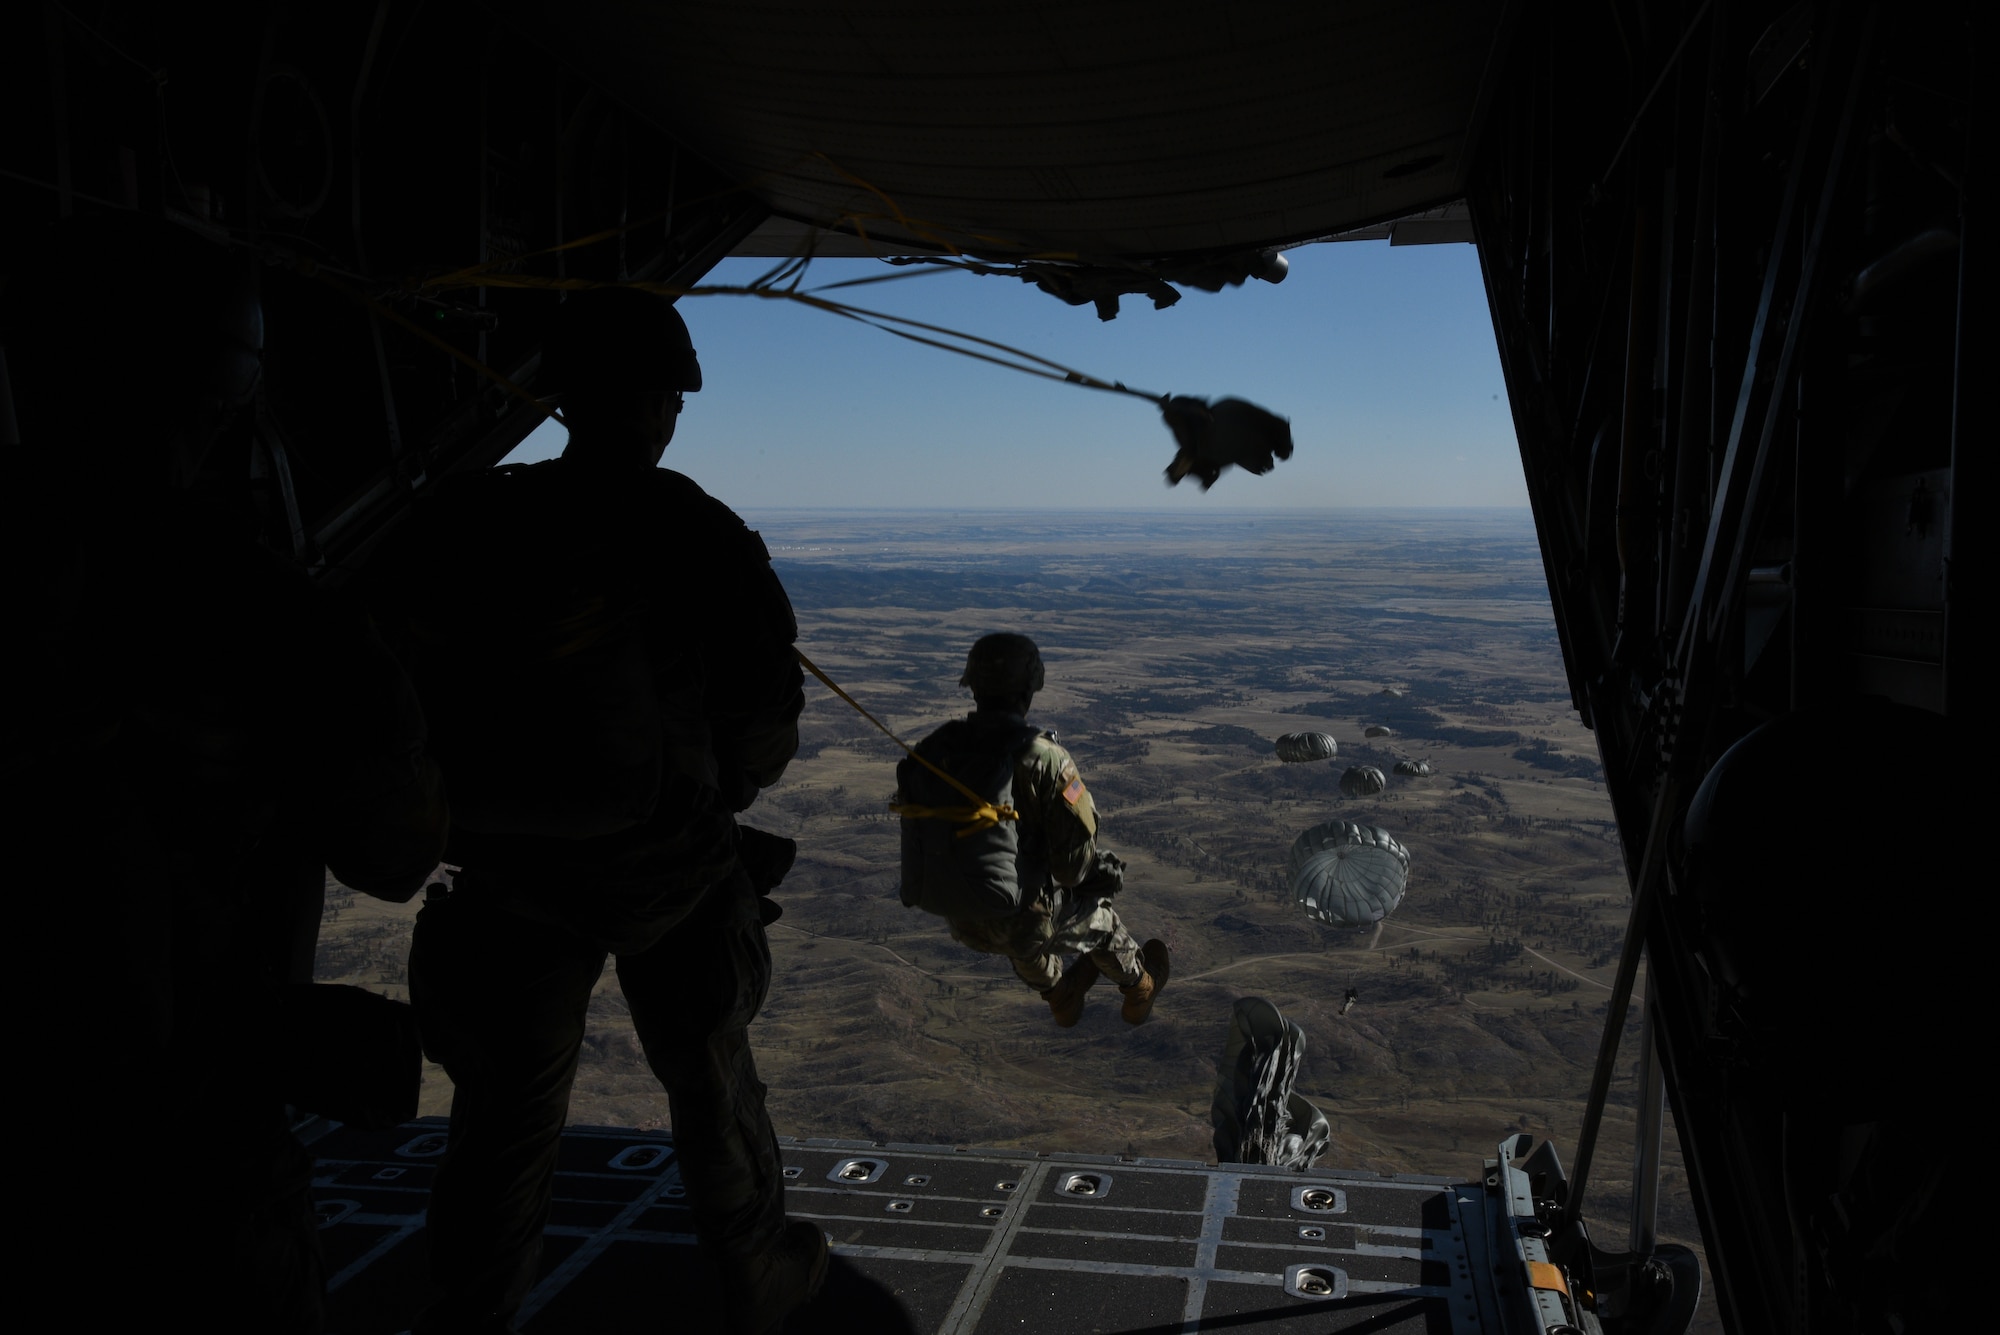 Paratroopers from the 10th Special Forces Group (Airborne) out of Fort Carson, Colorado complete their jump from the C-130H Hercules during the 22nd Air Force’s flagship exercise Rally in the Rockies Sept. 13-17, 2021. The exercise is designed to develop Airmen for combat operations by challenging them with realistic scenarios that support a full spectrum of operations during military actions, operations or hostile environments. (U.S. Air Force photo by Master Sgt. Jessica Kendziorek)